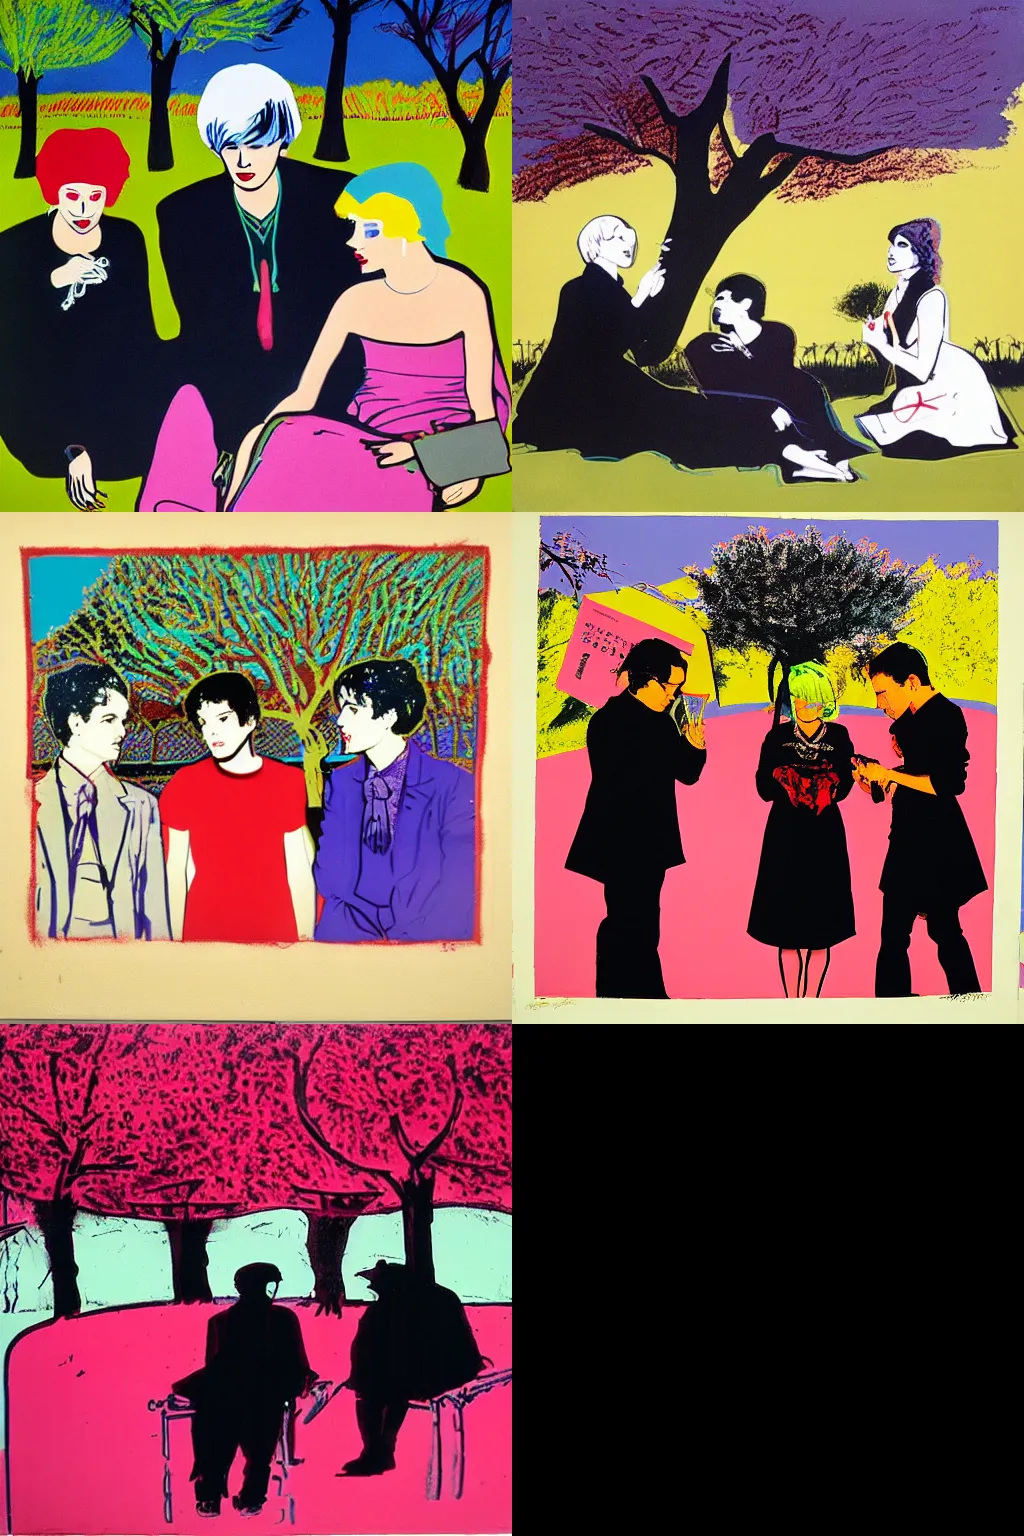 Prompt: an hd painting by andy warhol. three goths loitering in the shade, talking beneath a cherry tree outside a blockbuster video store.